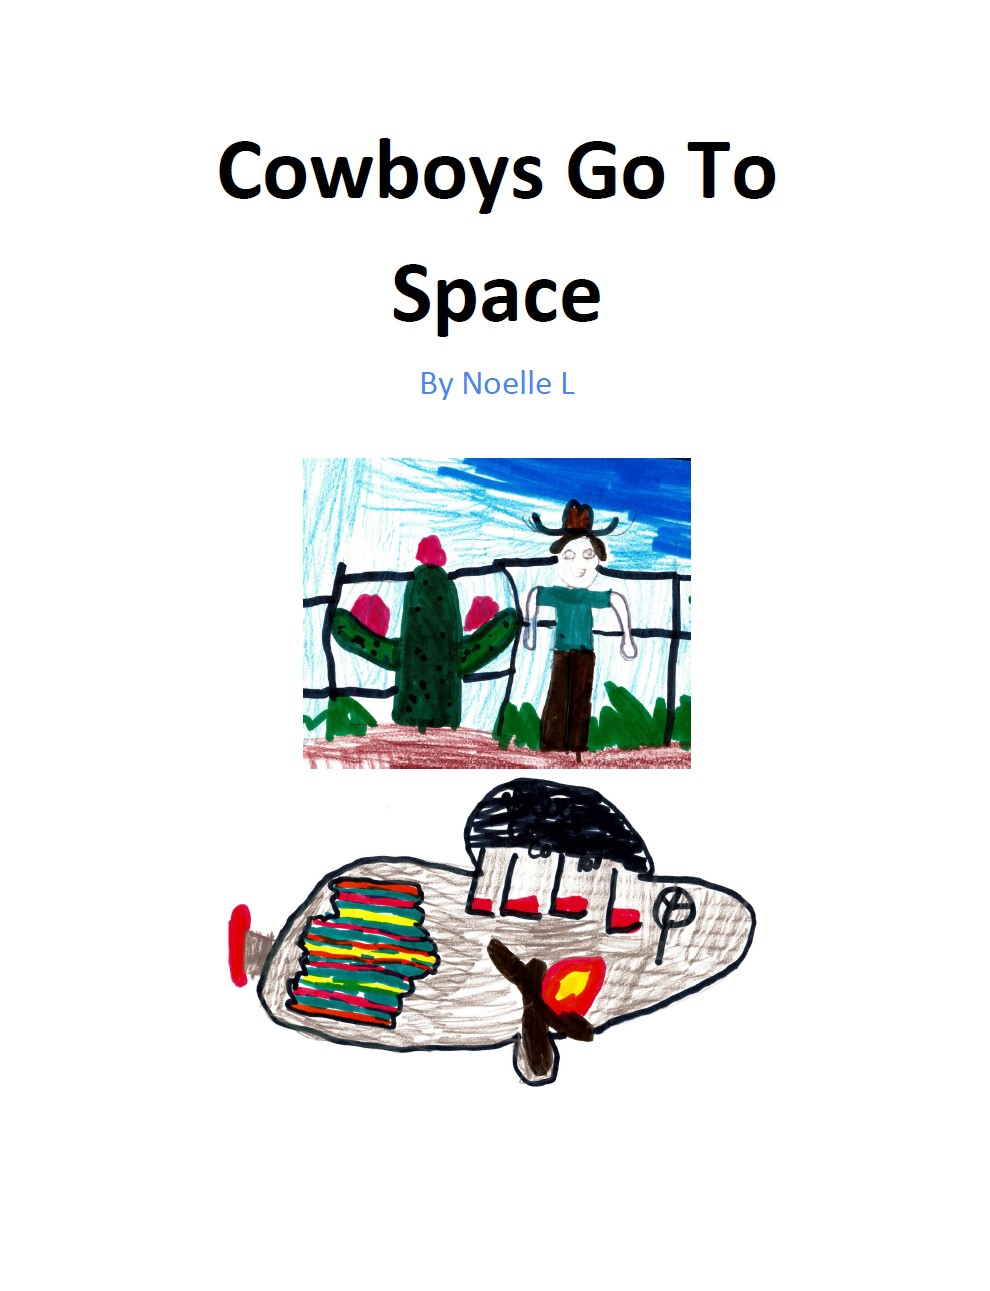 Cowboys Go To Space by Noelle L.